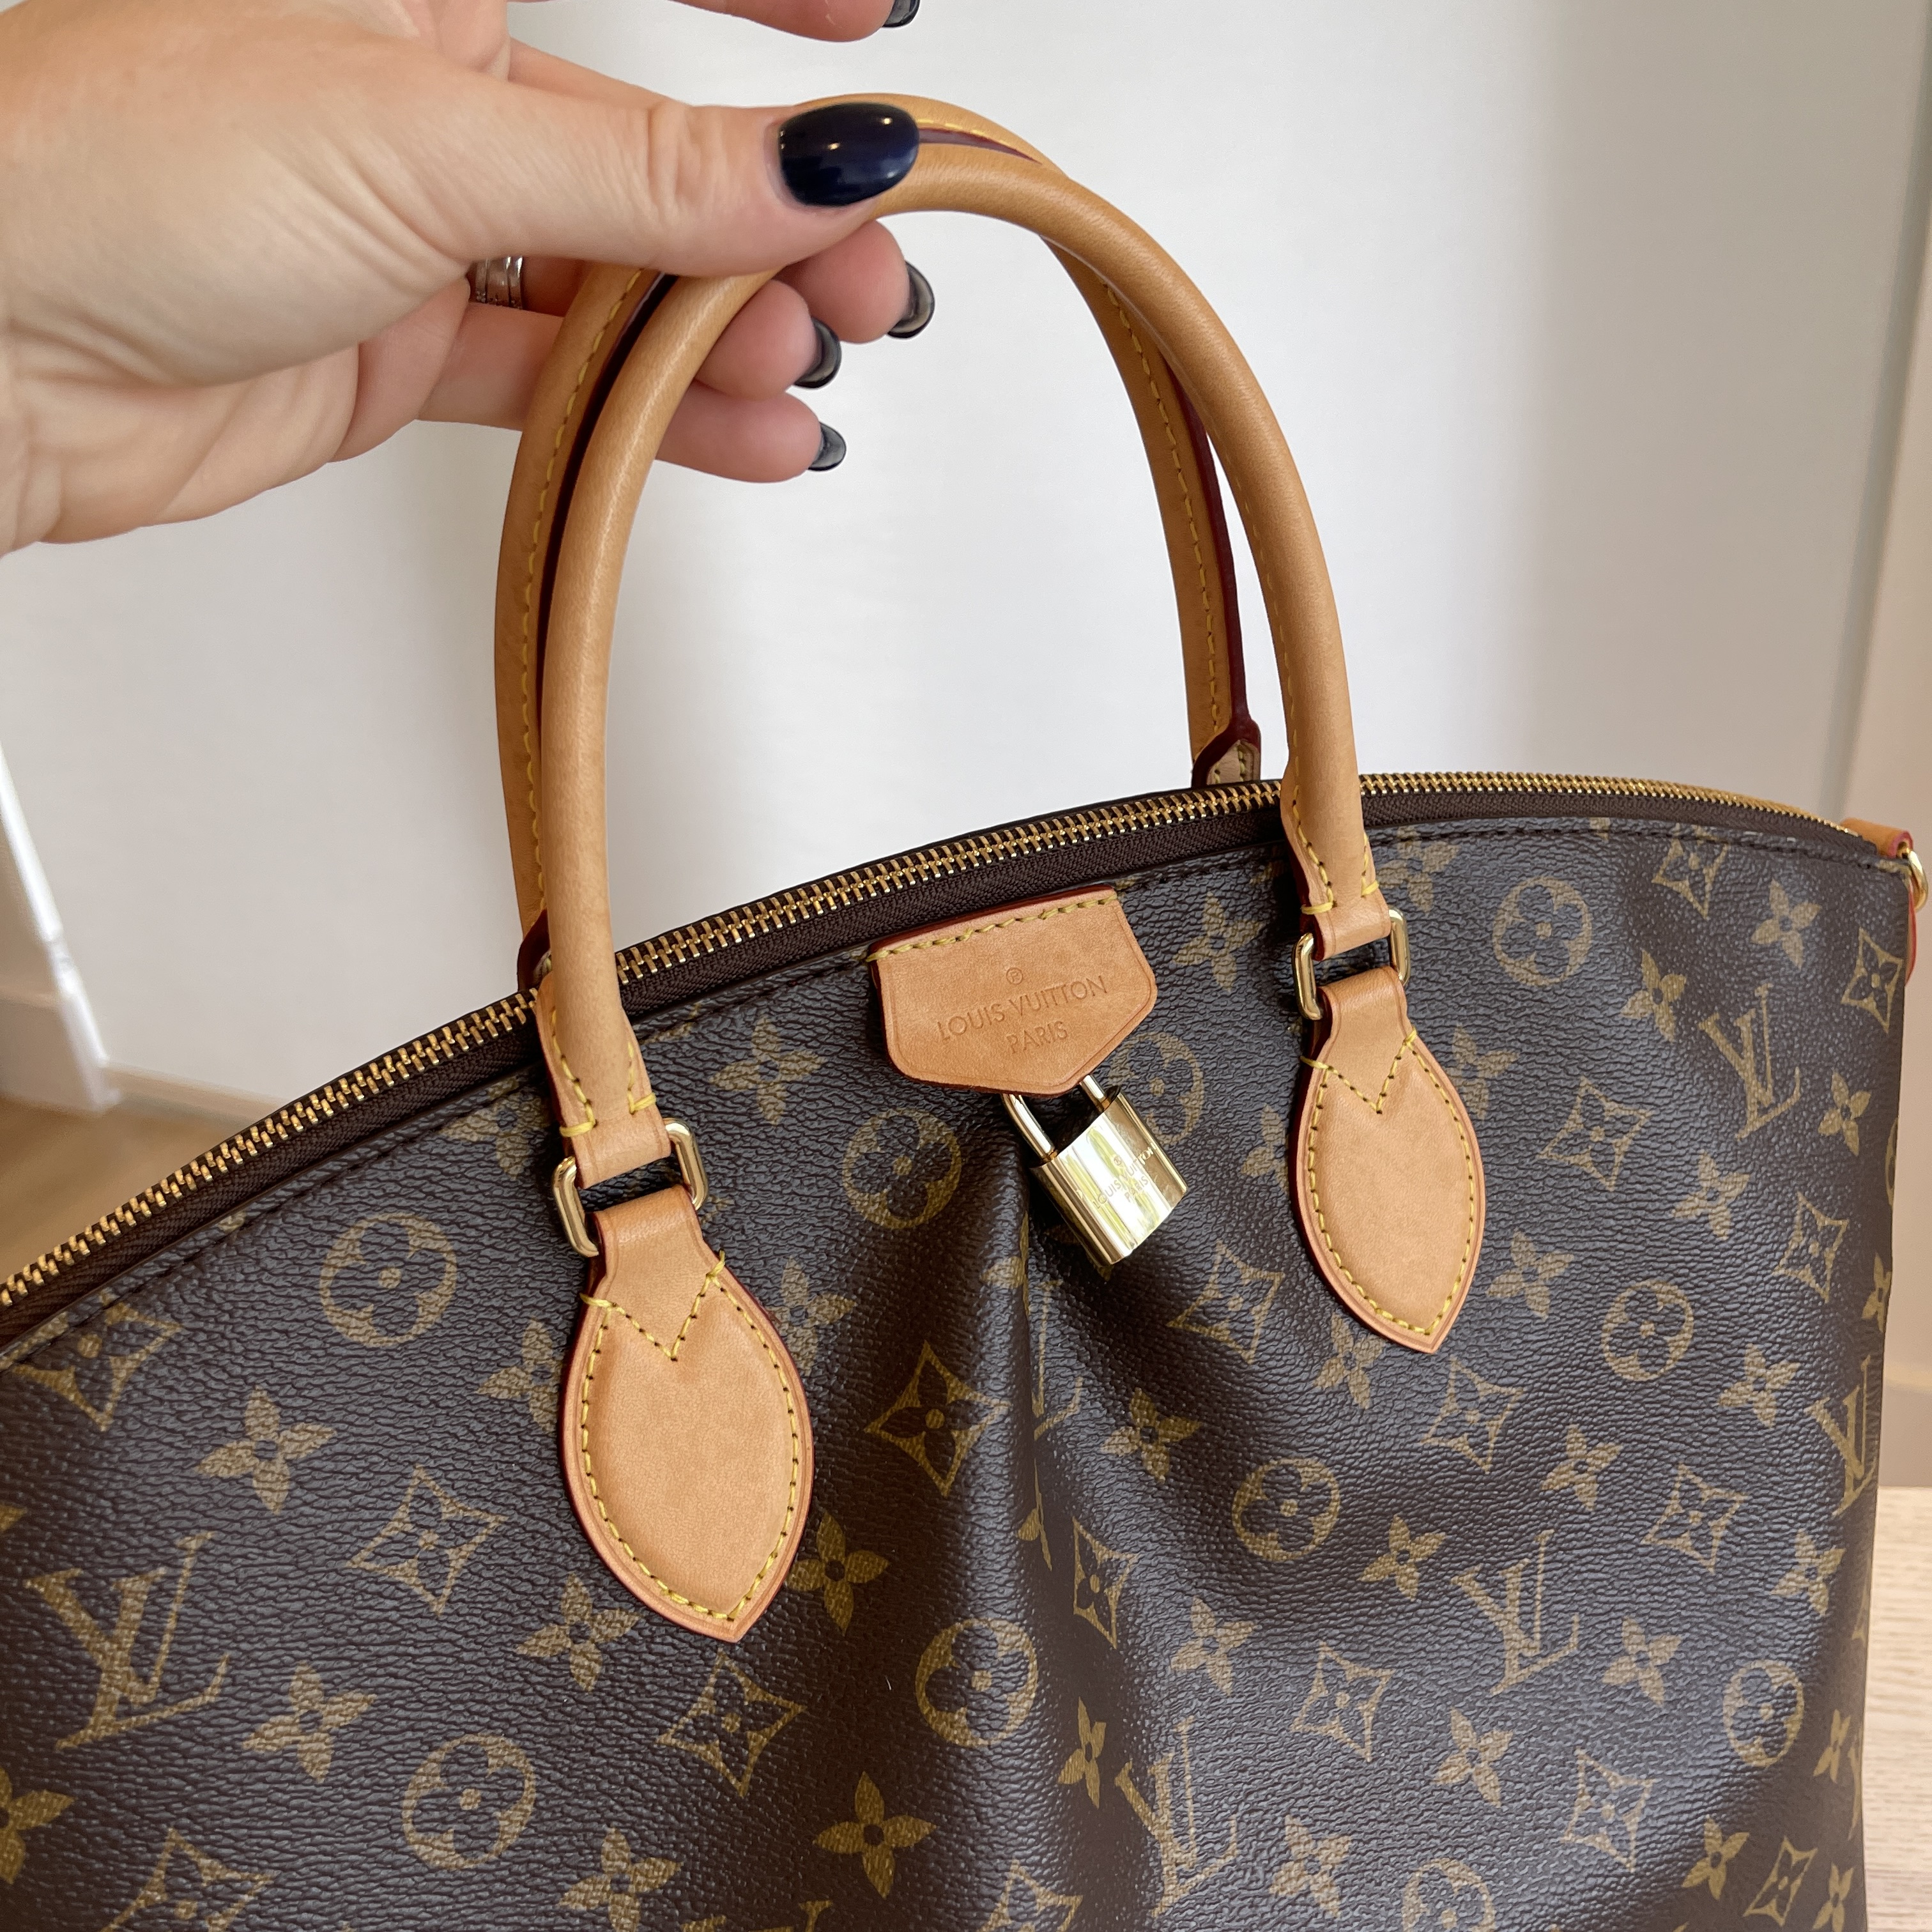 Buy Authentic Pre-owned Louis Vuitton LV Monogram Boetie MM Shoulder Tote  Bag Purse M45714 140910 from Japan - Buy authentic Plus exclusive items  from Japan